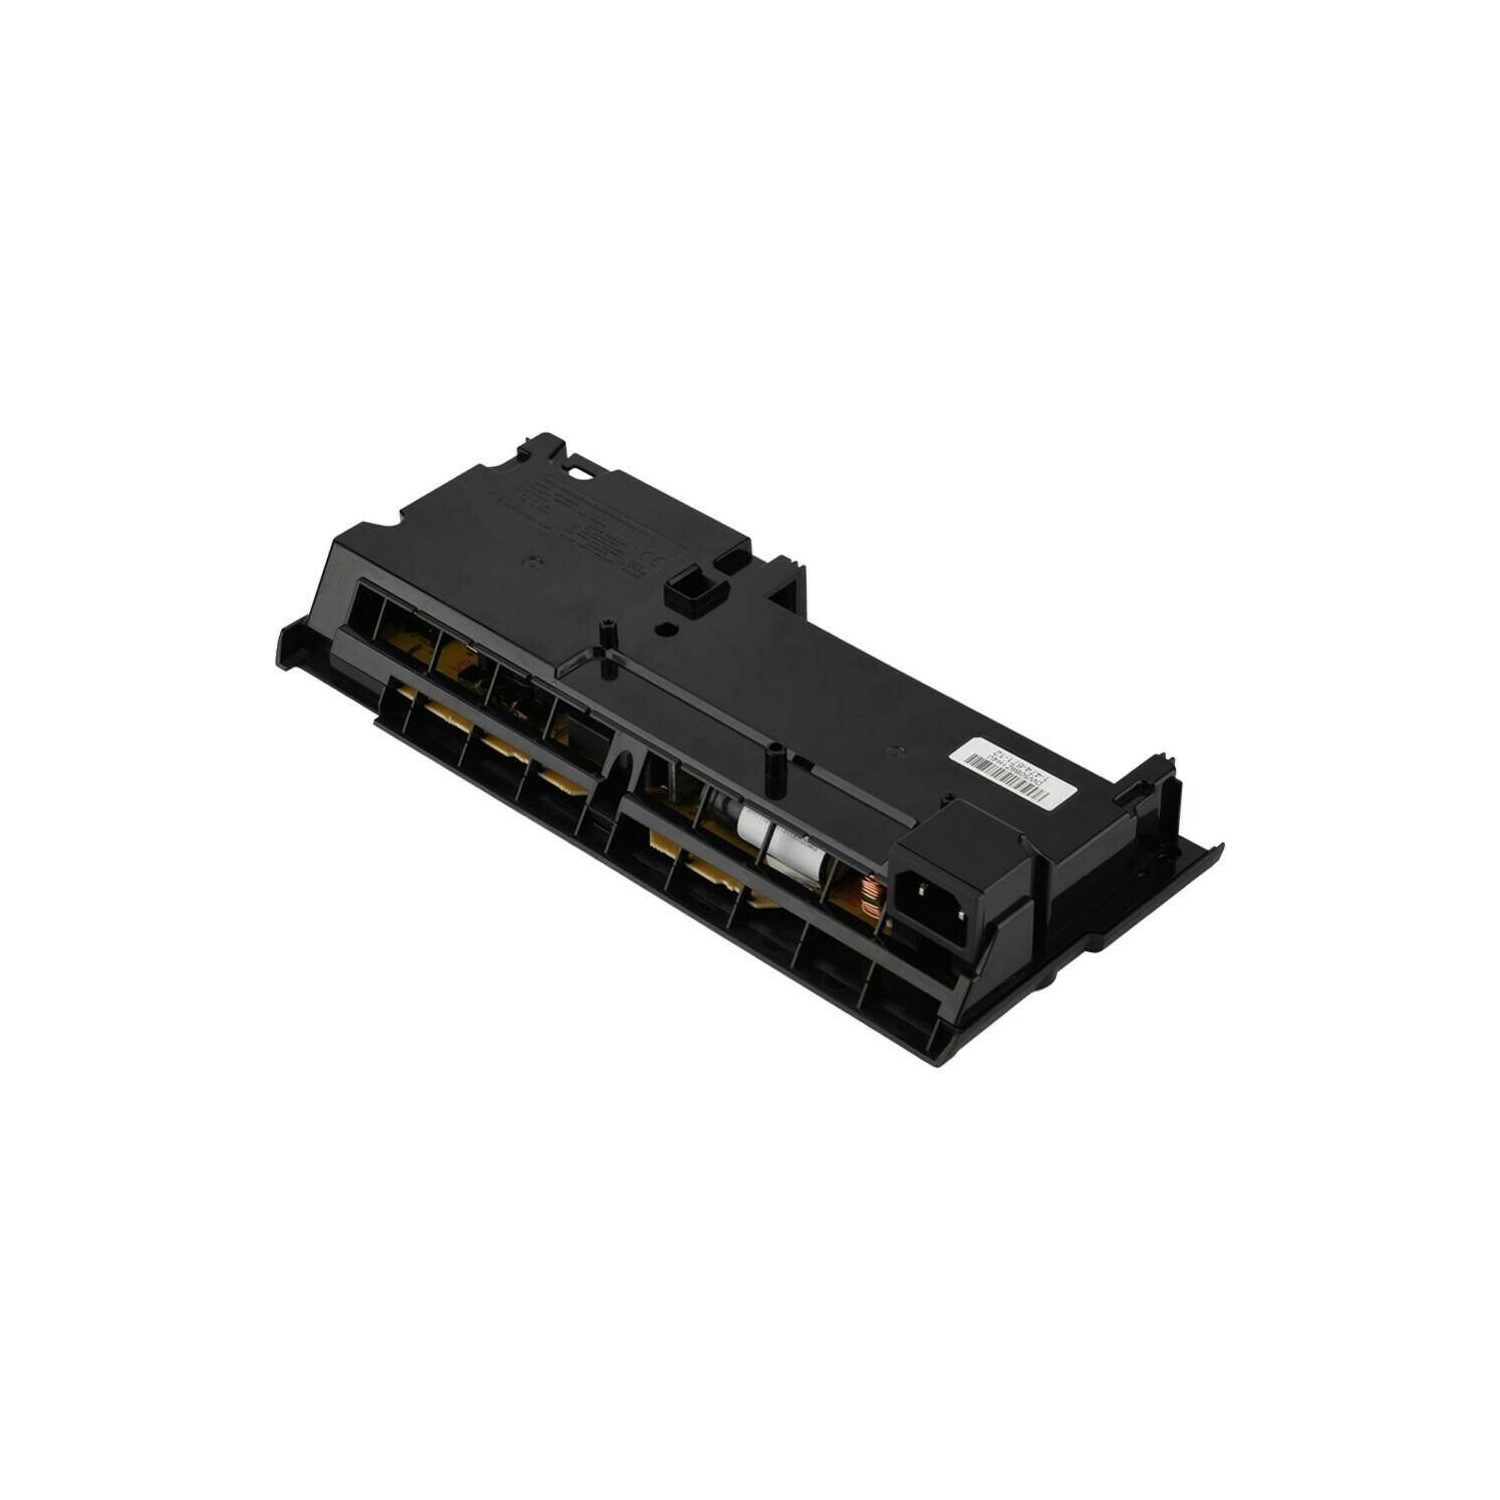 Refurbished (Excellent) - Replacement Power Supply N15-300P1A CUH-7115 Board For Sony PlayStation PS4 Pro